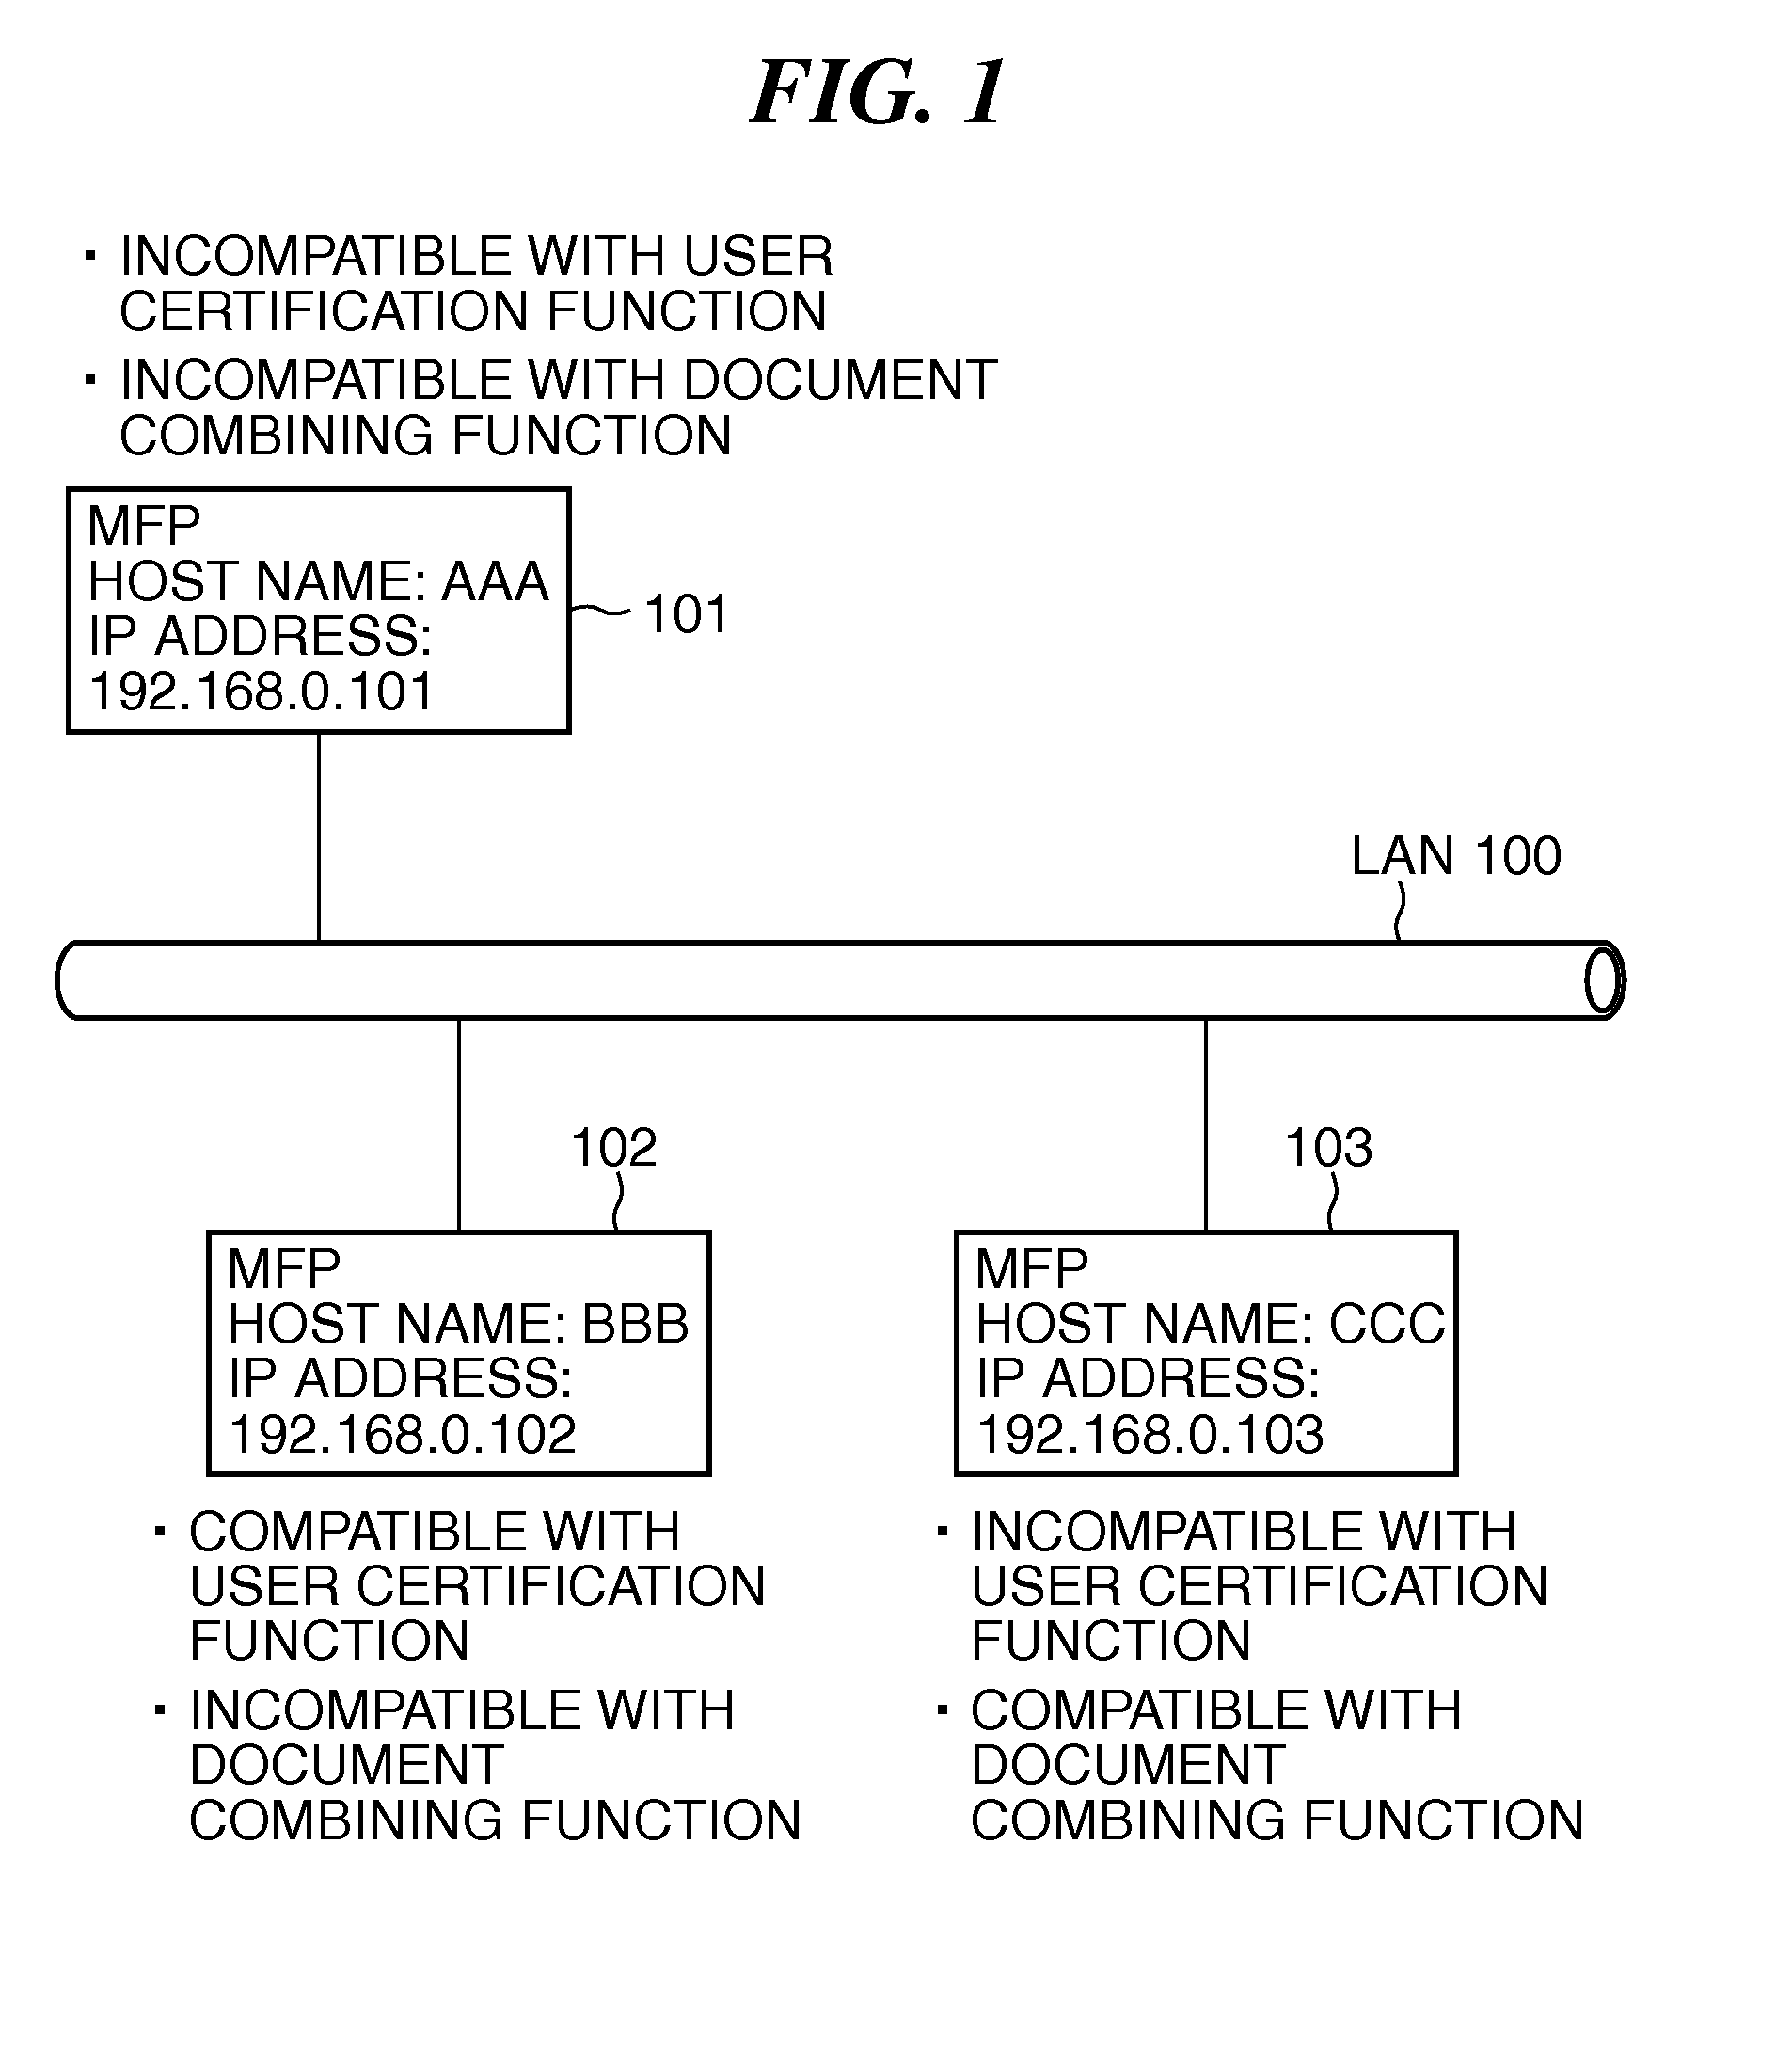 Image processing apparatus for executing a process flow, method of controlling the same and storage medium